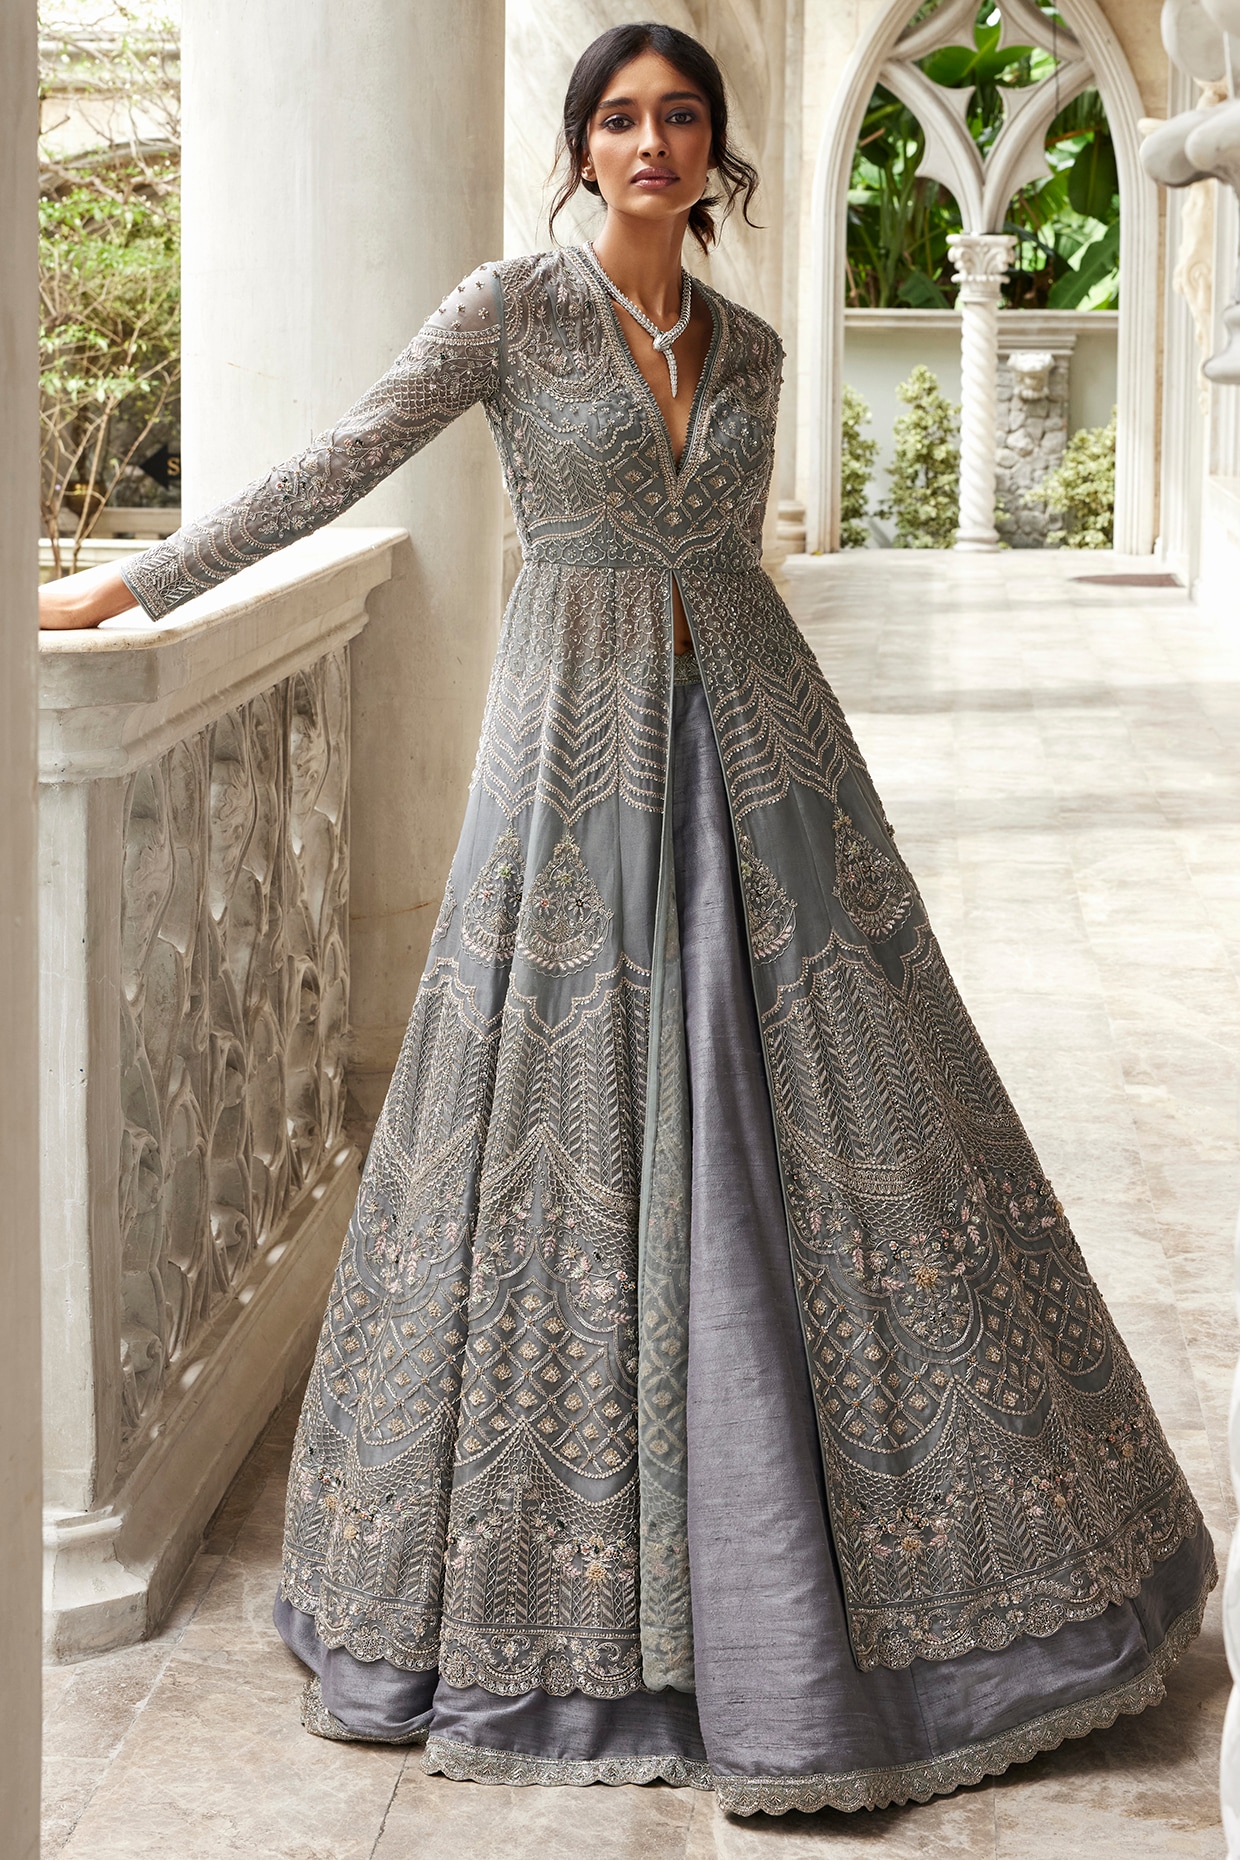 How To Convert Your Expensive Wedding Lehenga Into A Stunning Anarkali?